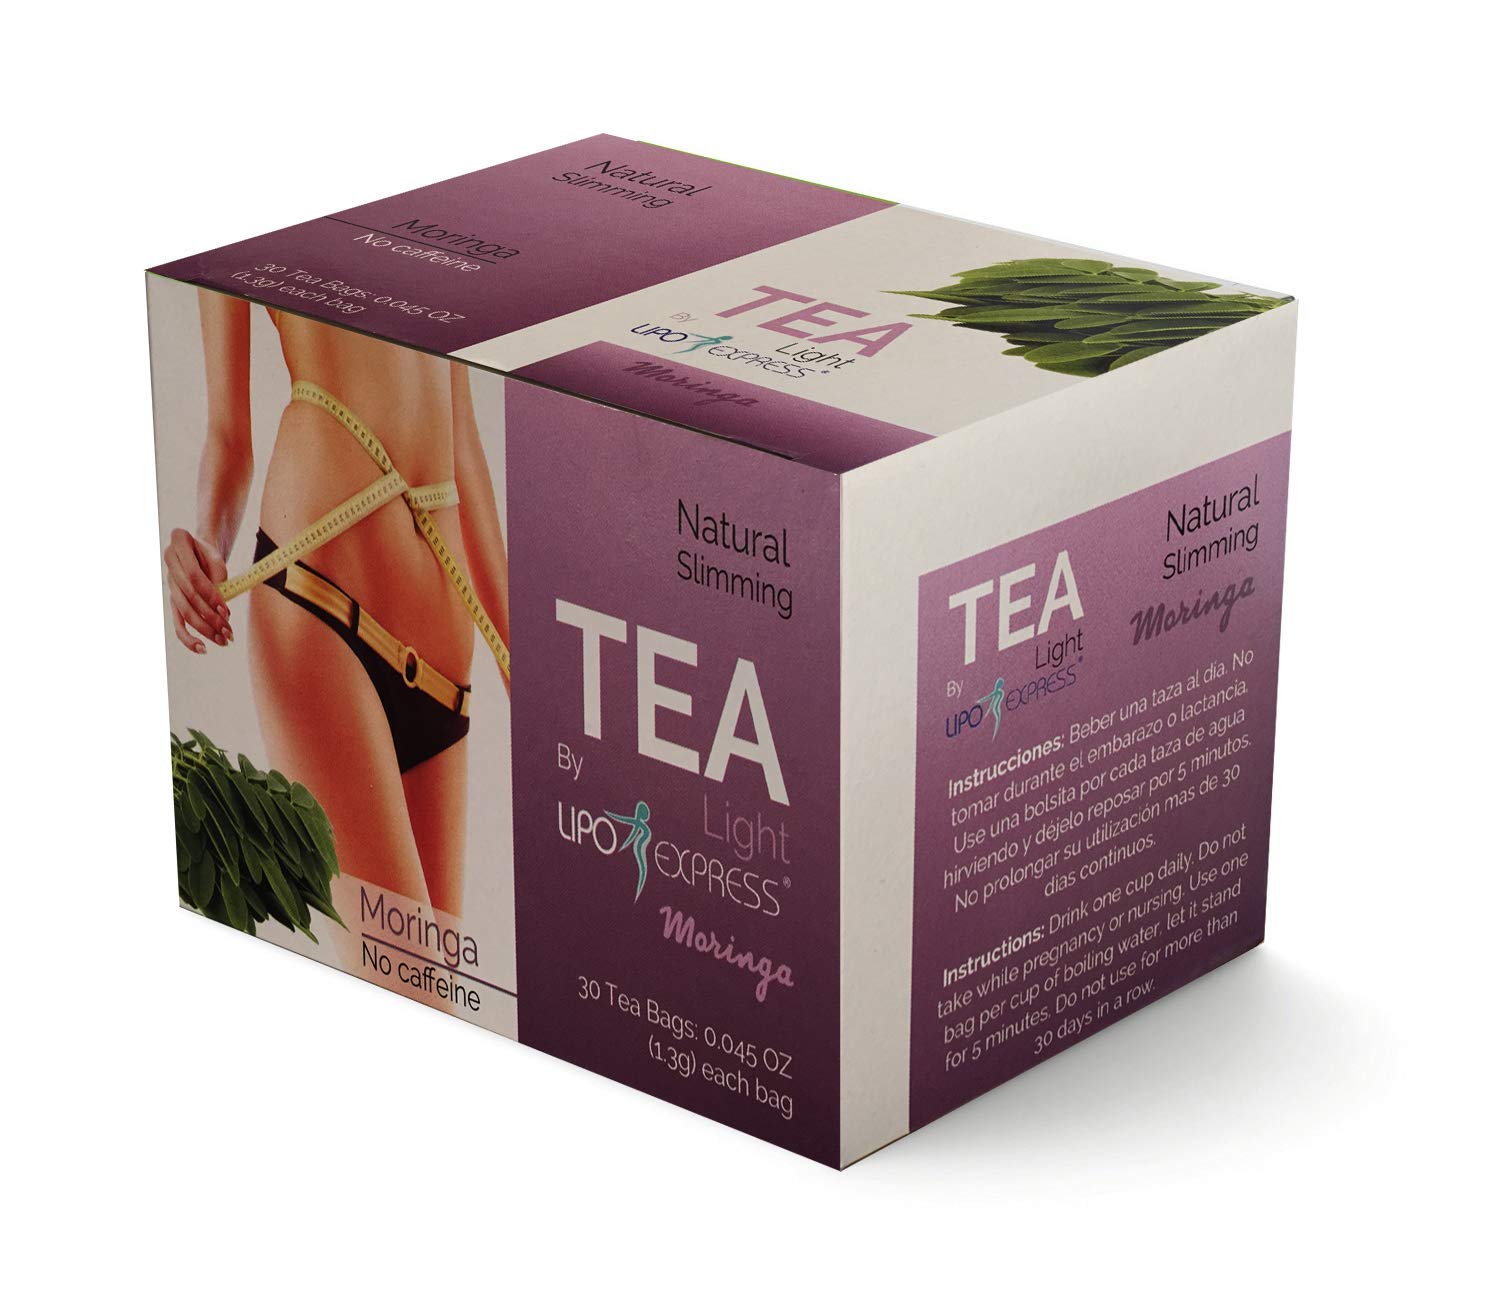 Weight Loss Tea Detox Tea Lipo Express Body Cleanse, Reduce Bloating, &  Appetite Suppressant, 30 Day Tea-tox, with Potent Traditional 100% Naturals  Herbs. Energy Booster. (Moringa Tea)